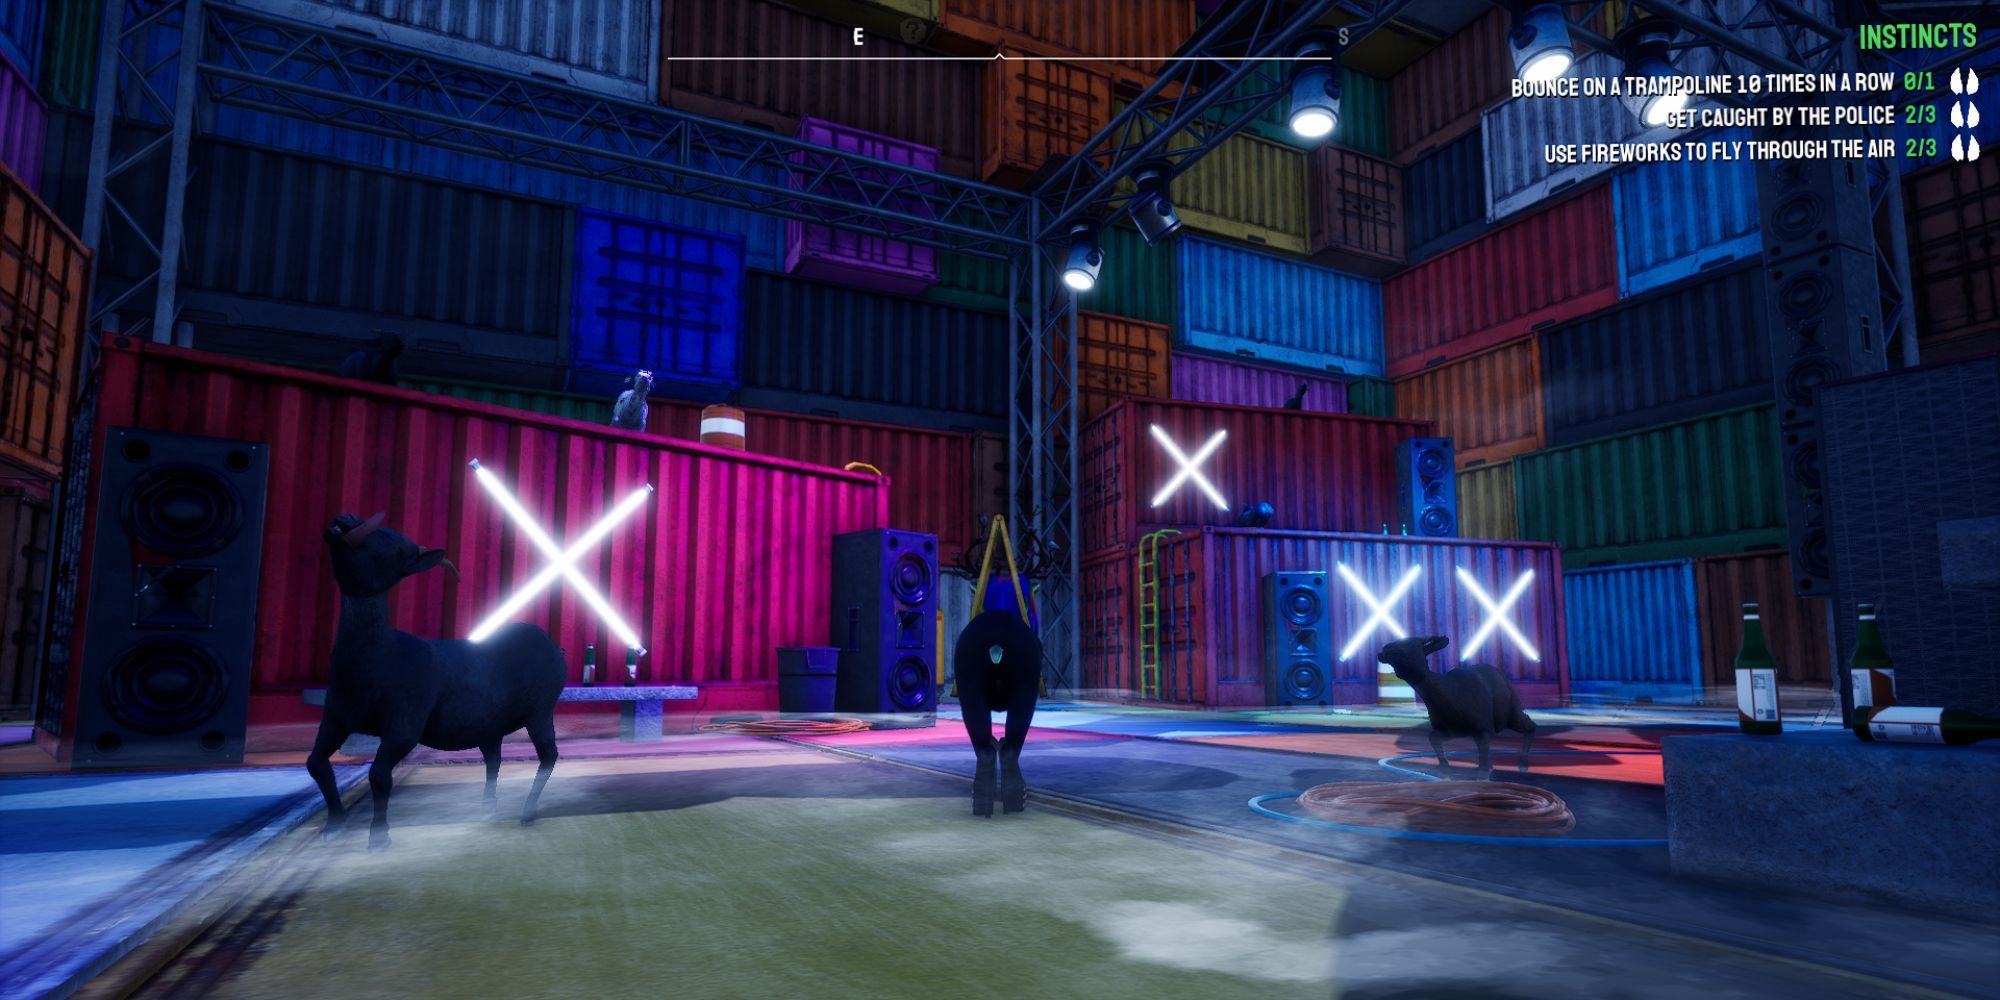 Piglor is surrounded by dancing goats inside Club Mohair, which is decked out with "X" LED lights and container units